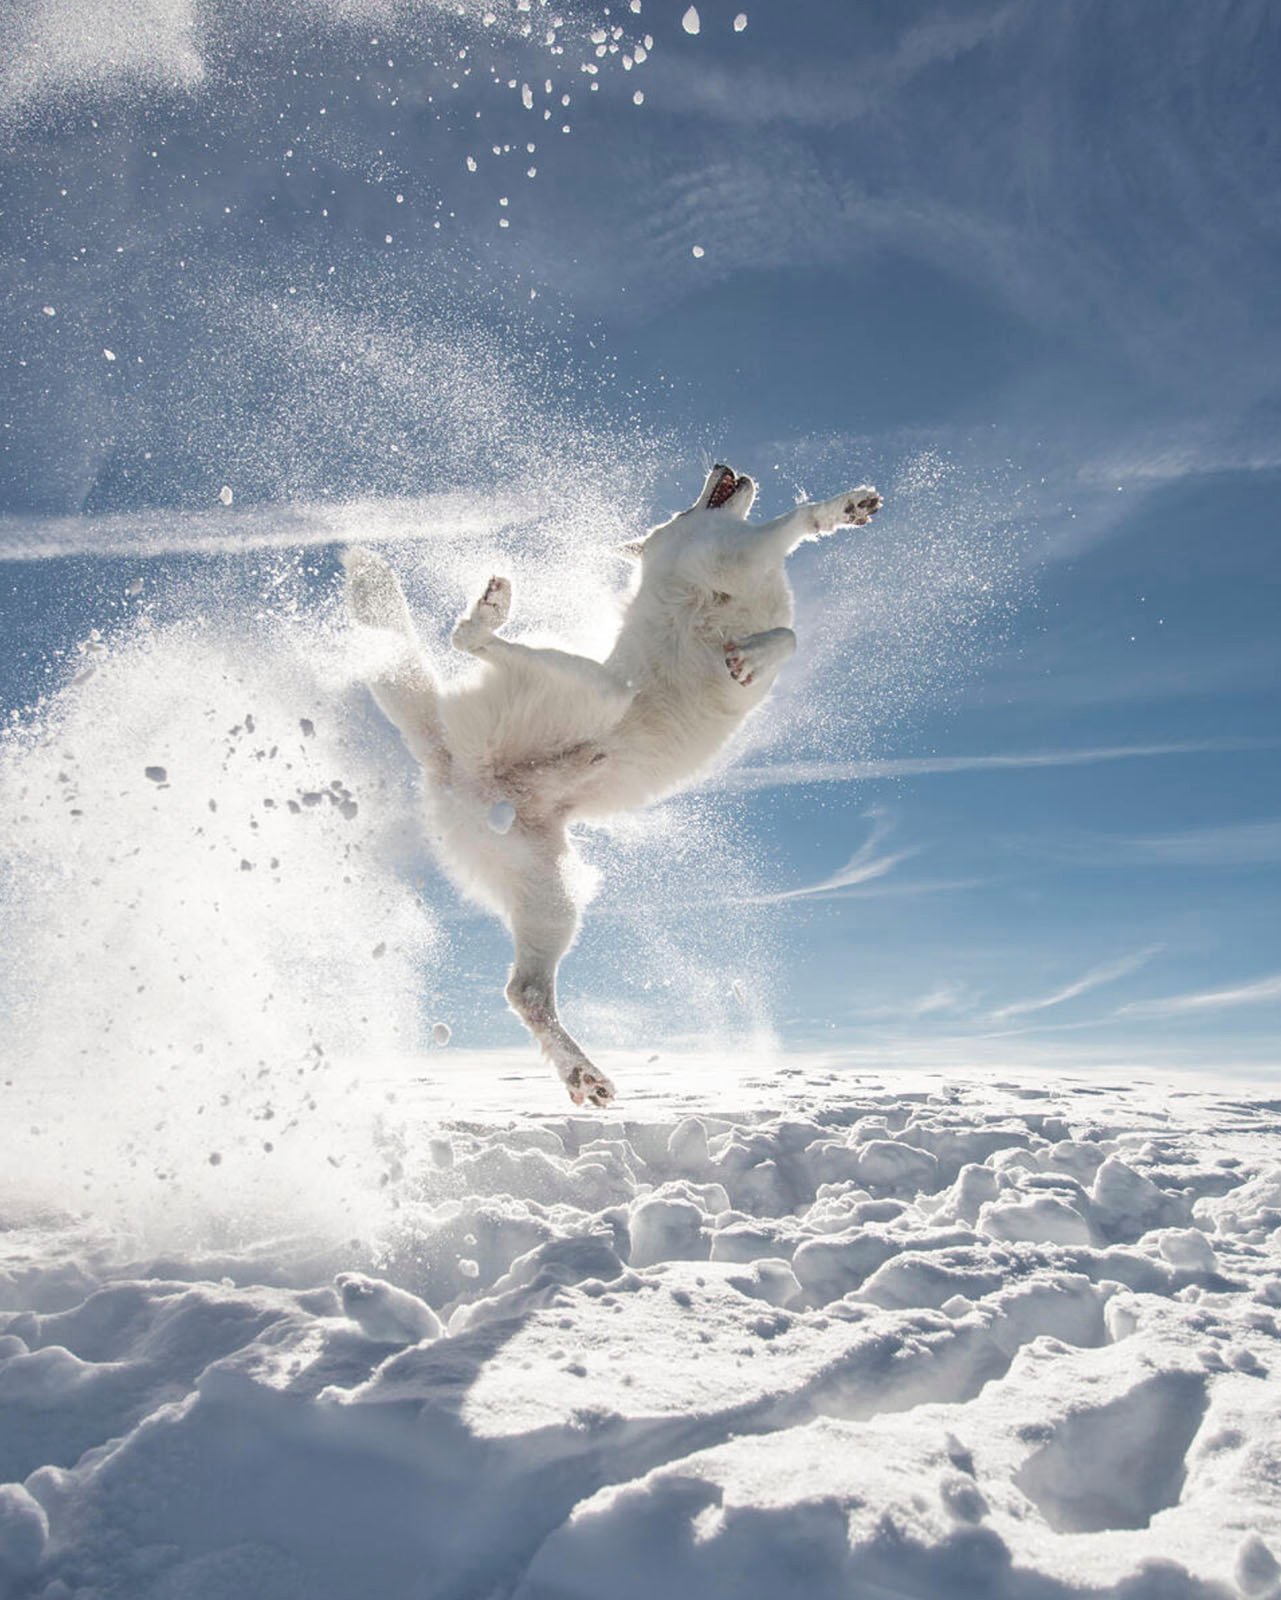 A joyful dog leaps high into the air on a bright sunny day, playfully catching snowflakes as snow bursts around it, against a vivid blue sky with white clouds.